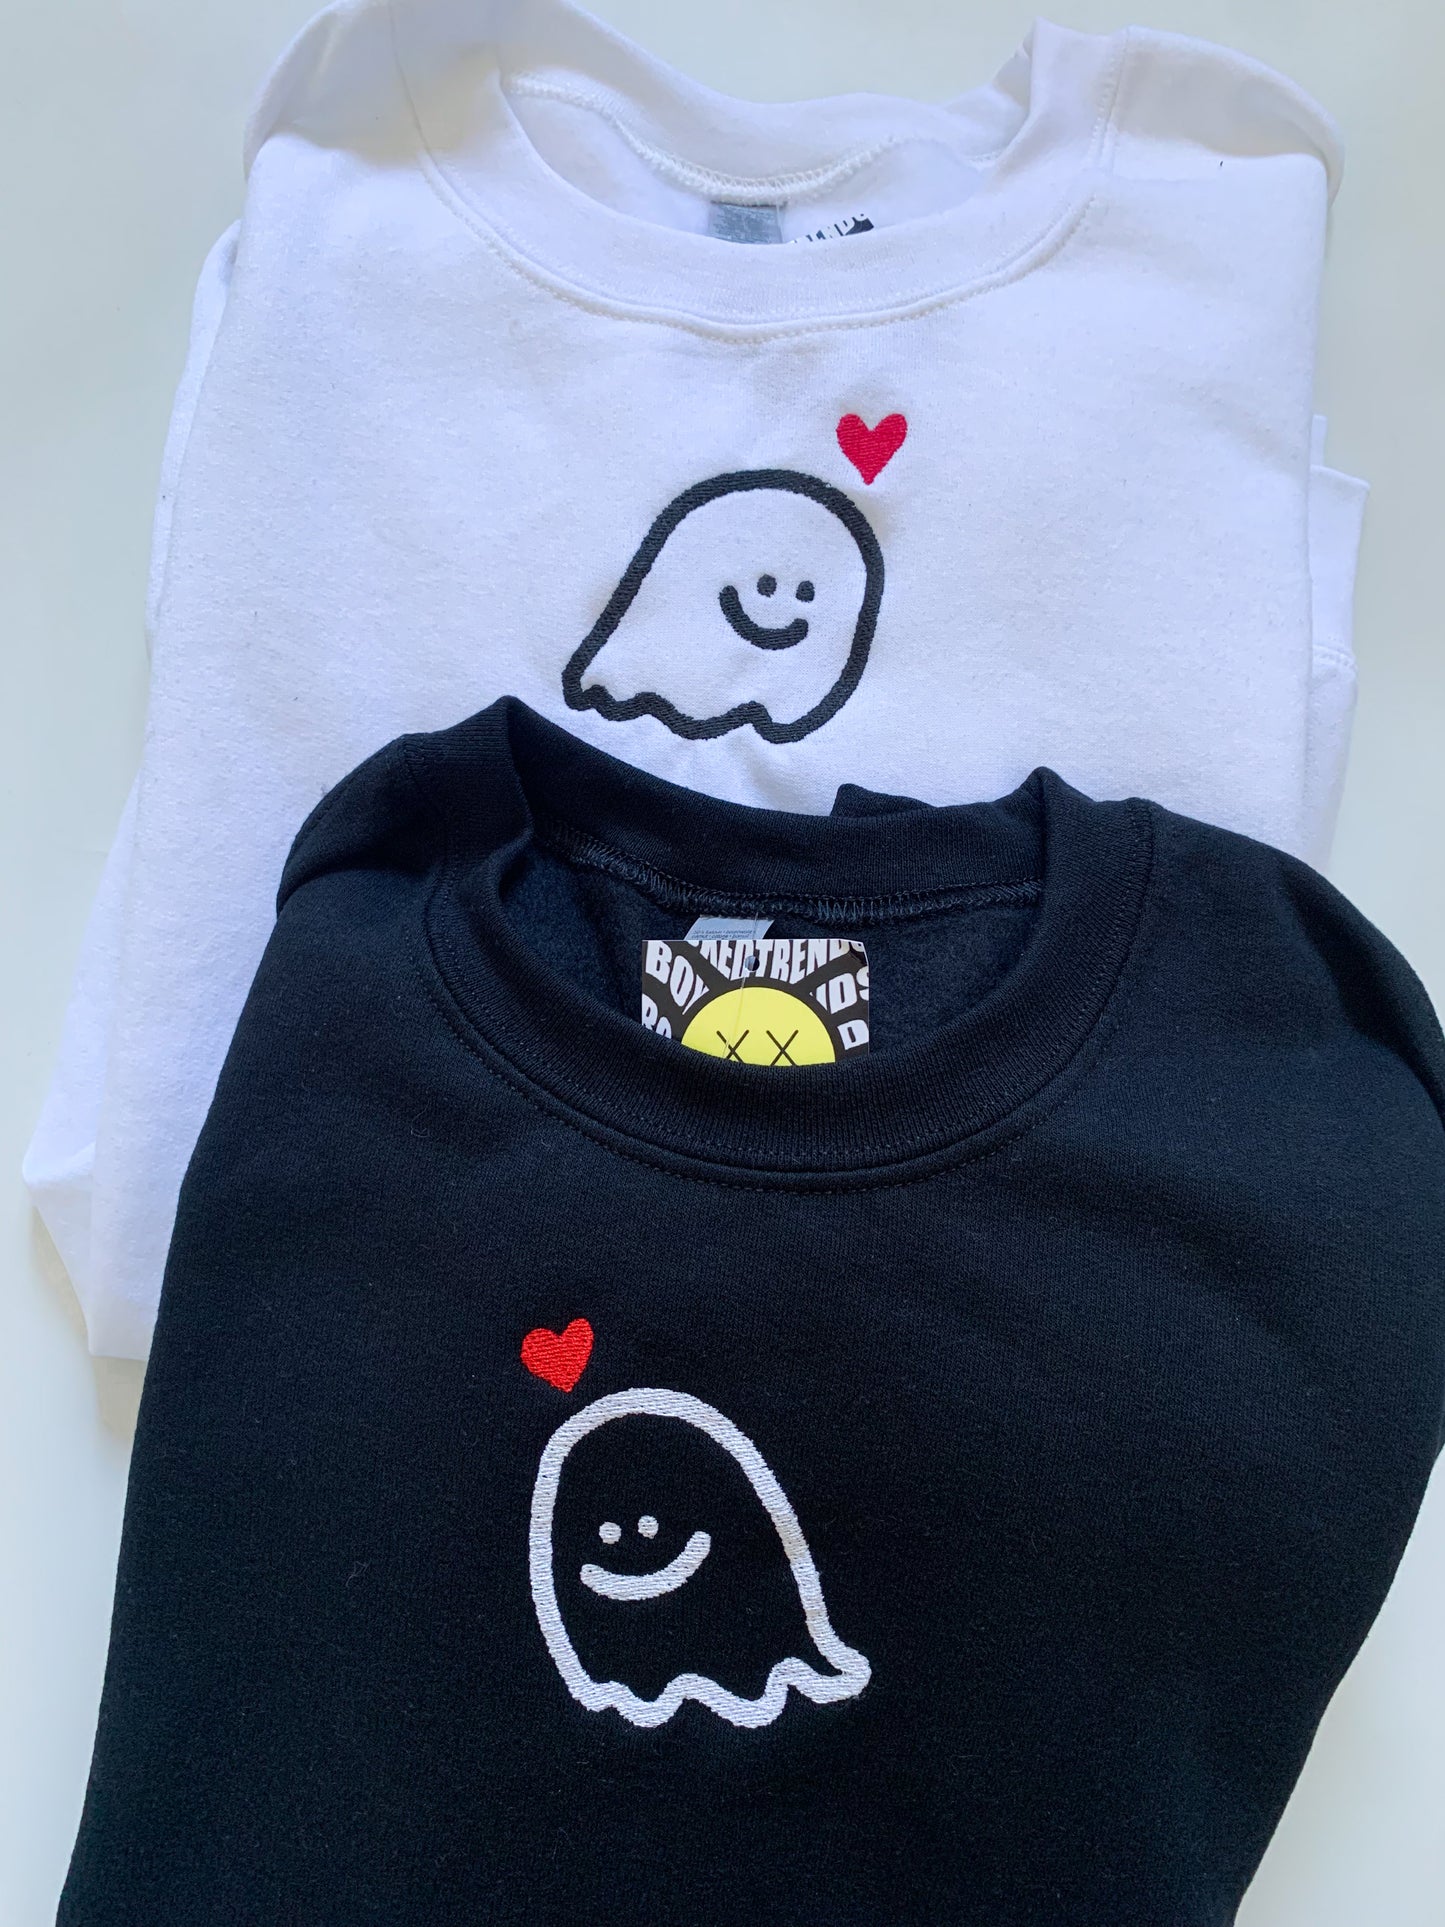 Heart Ghosts Embroidered Set